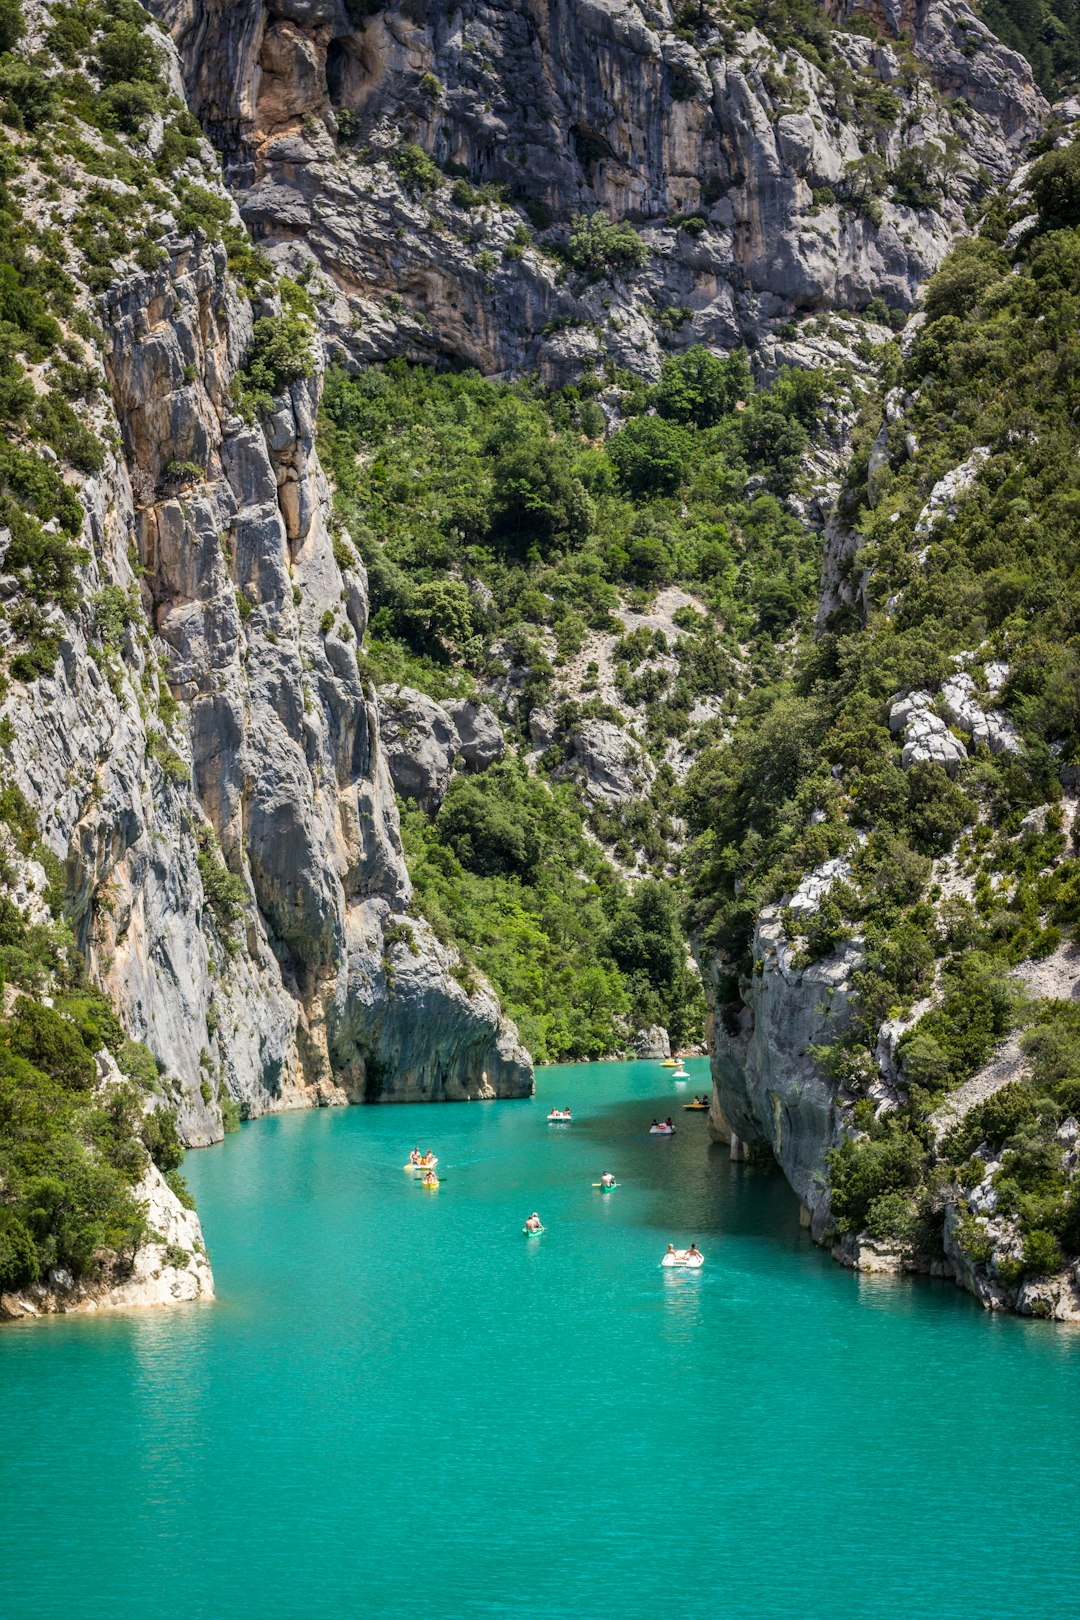 Travel Tips and Stories of Gorges du Verdon in France